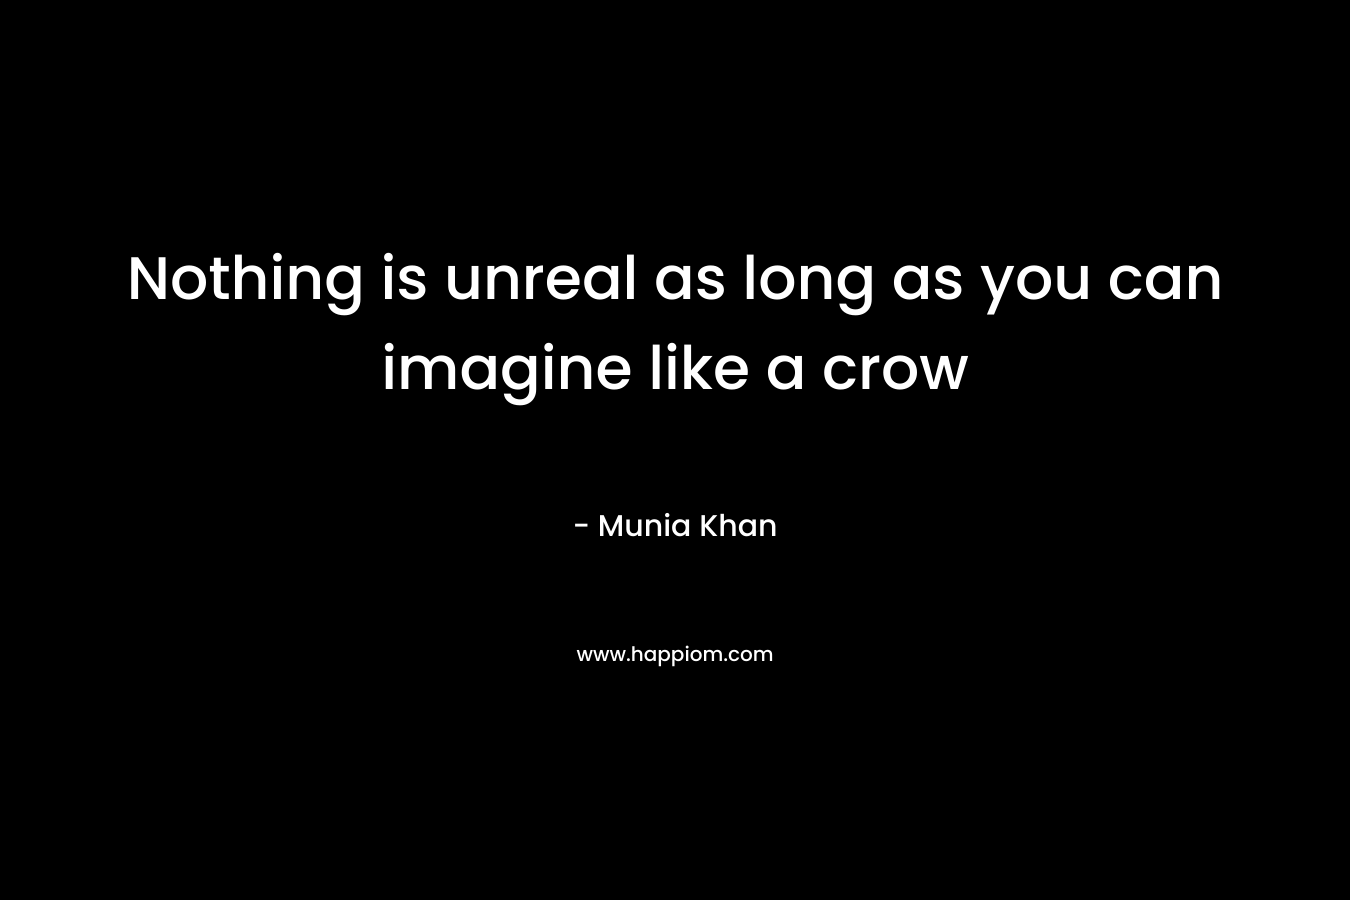 Nothing is unreal as long as you can imagine like a crow